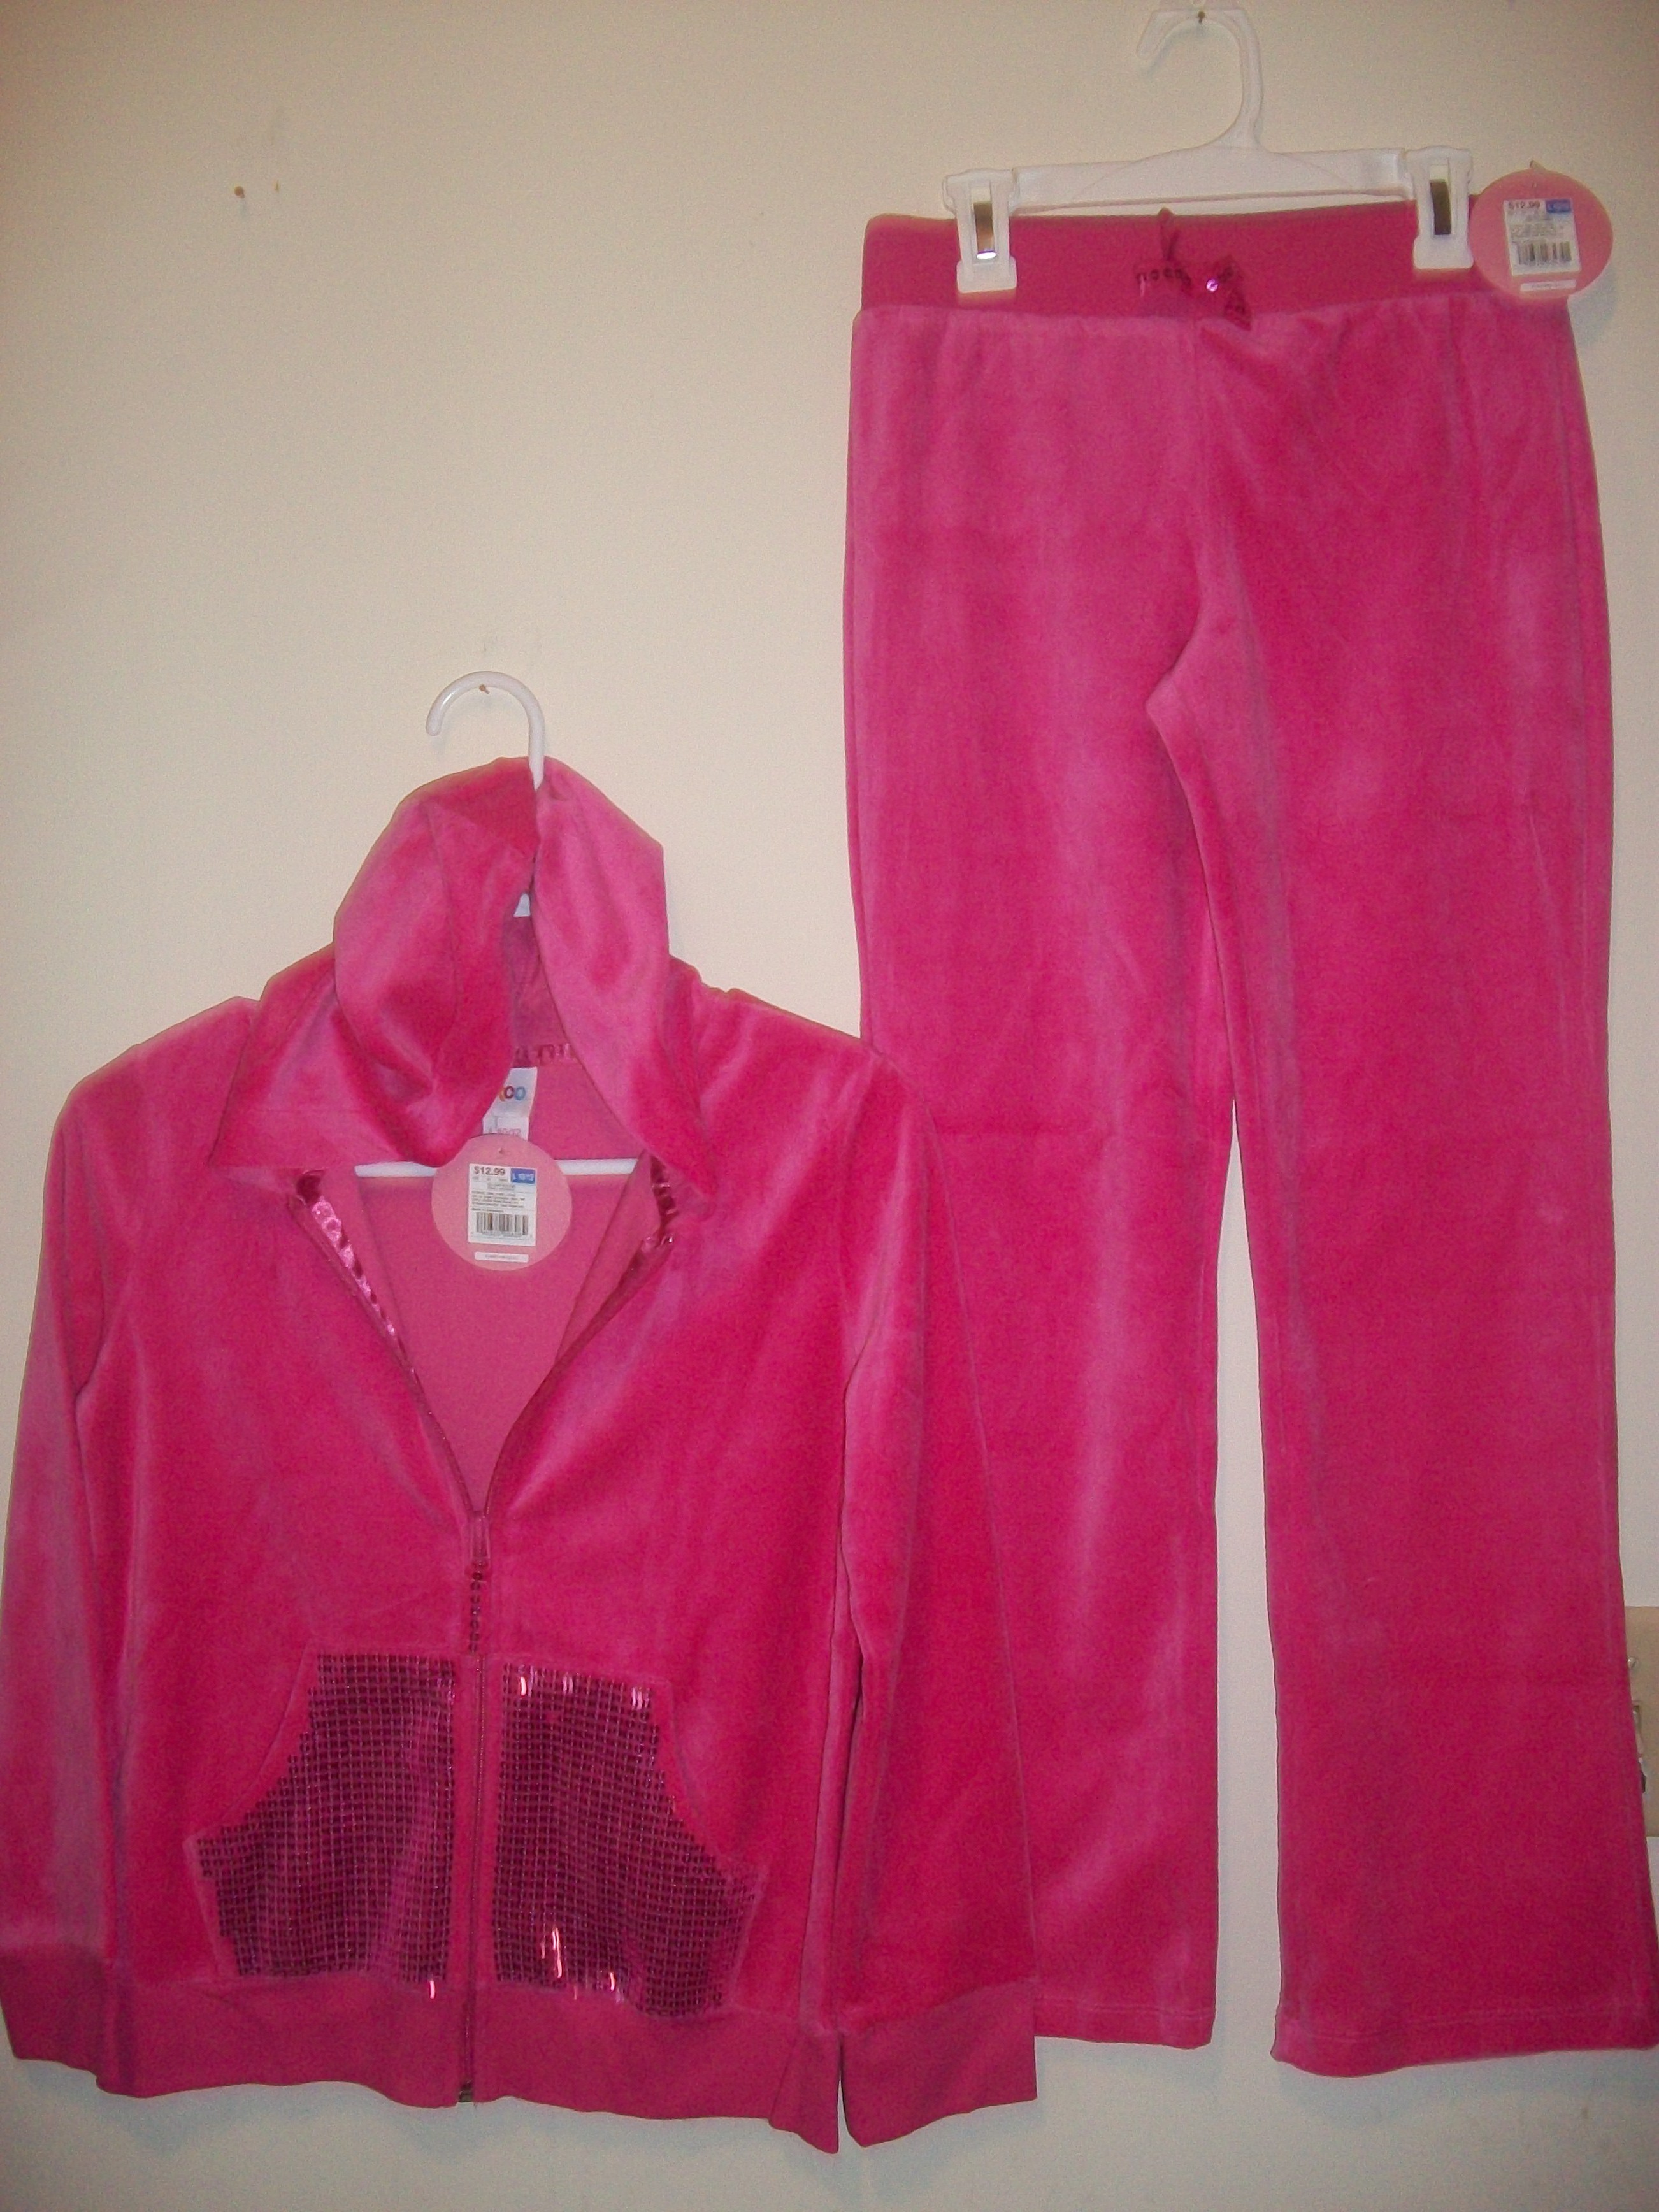 Girls size 10/12 Pink Velour pants and zip hoodie